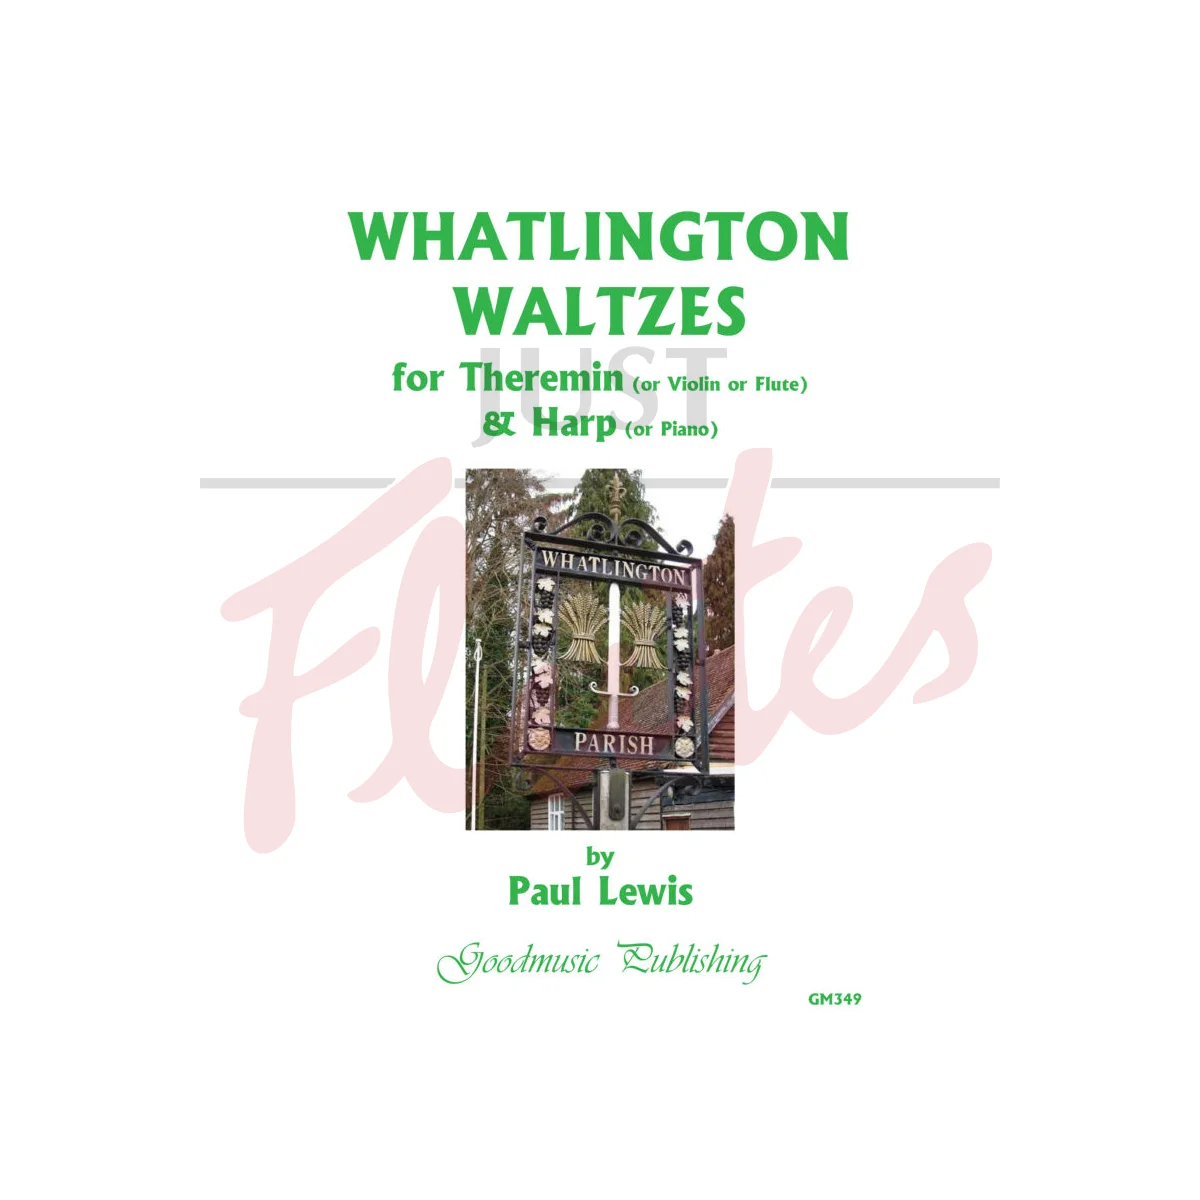 Whatlington Waltzes for Flute/Theremin/Violin and Harp/Piano